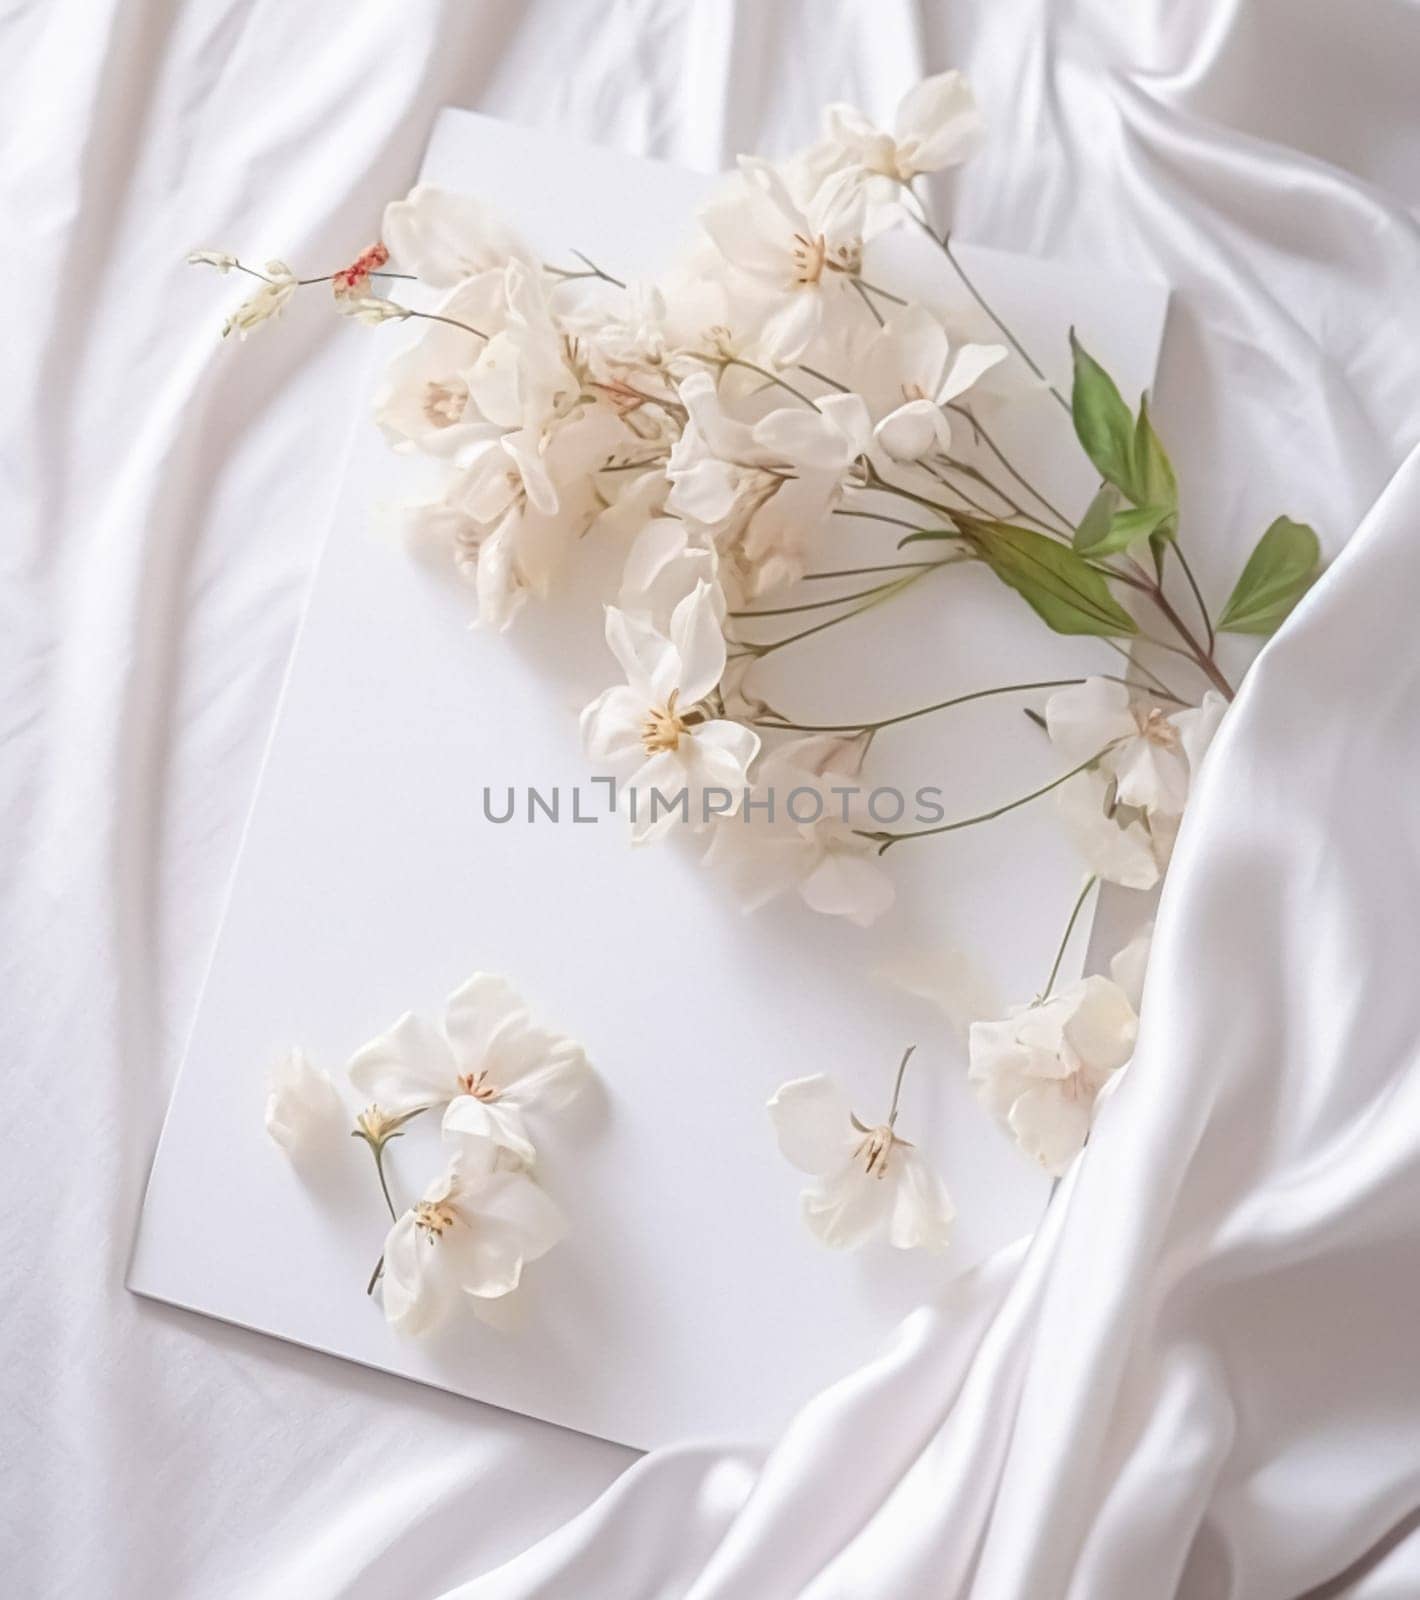 Floral composition. White flowers on white fabric. Flat lay, top view, copy space.